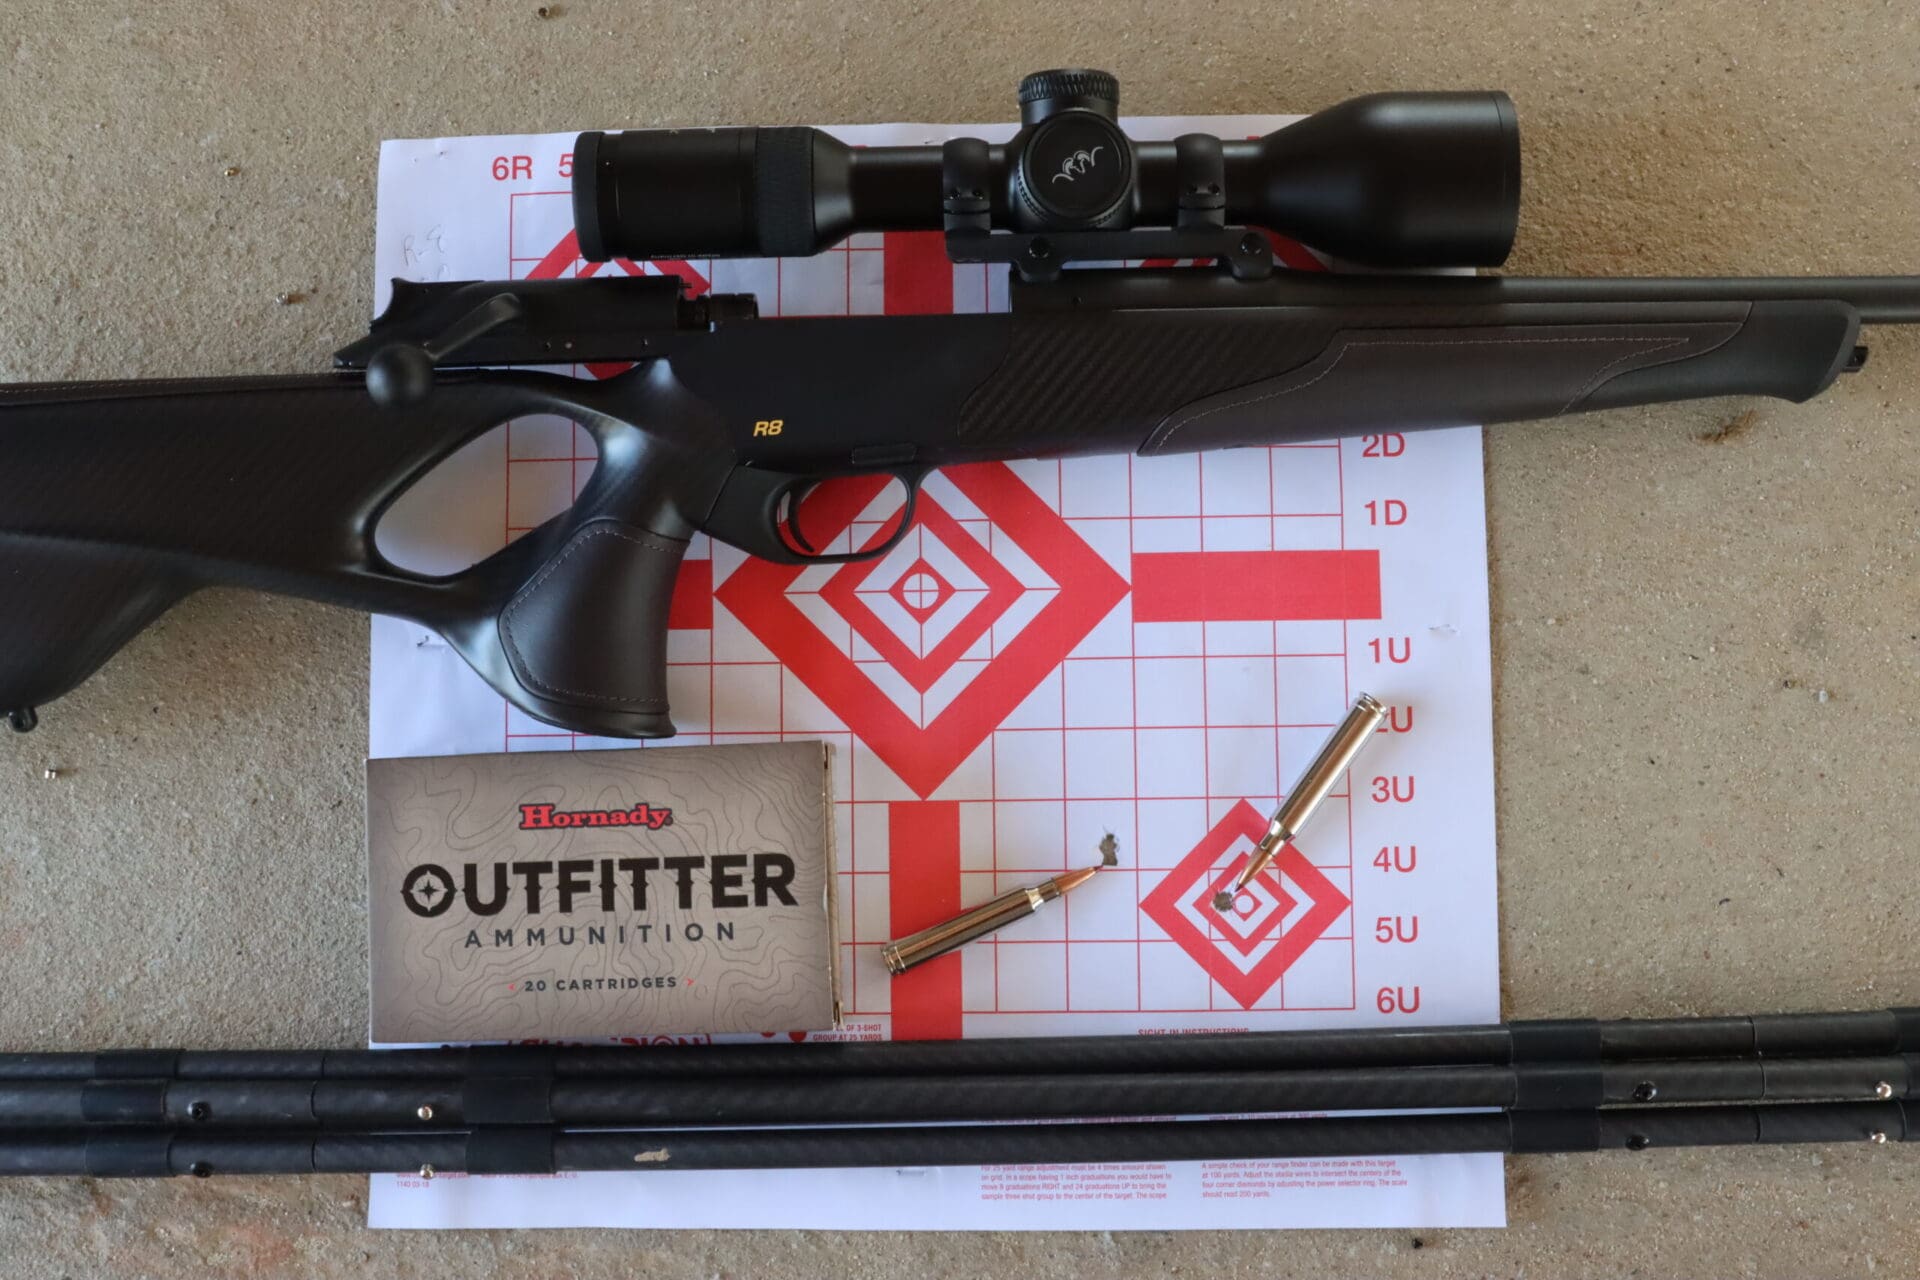 Blaser R8 Ultimate Carbon review